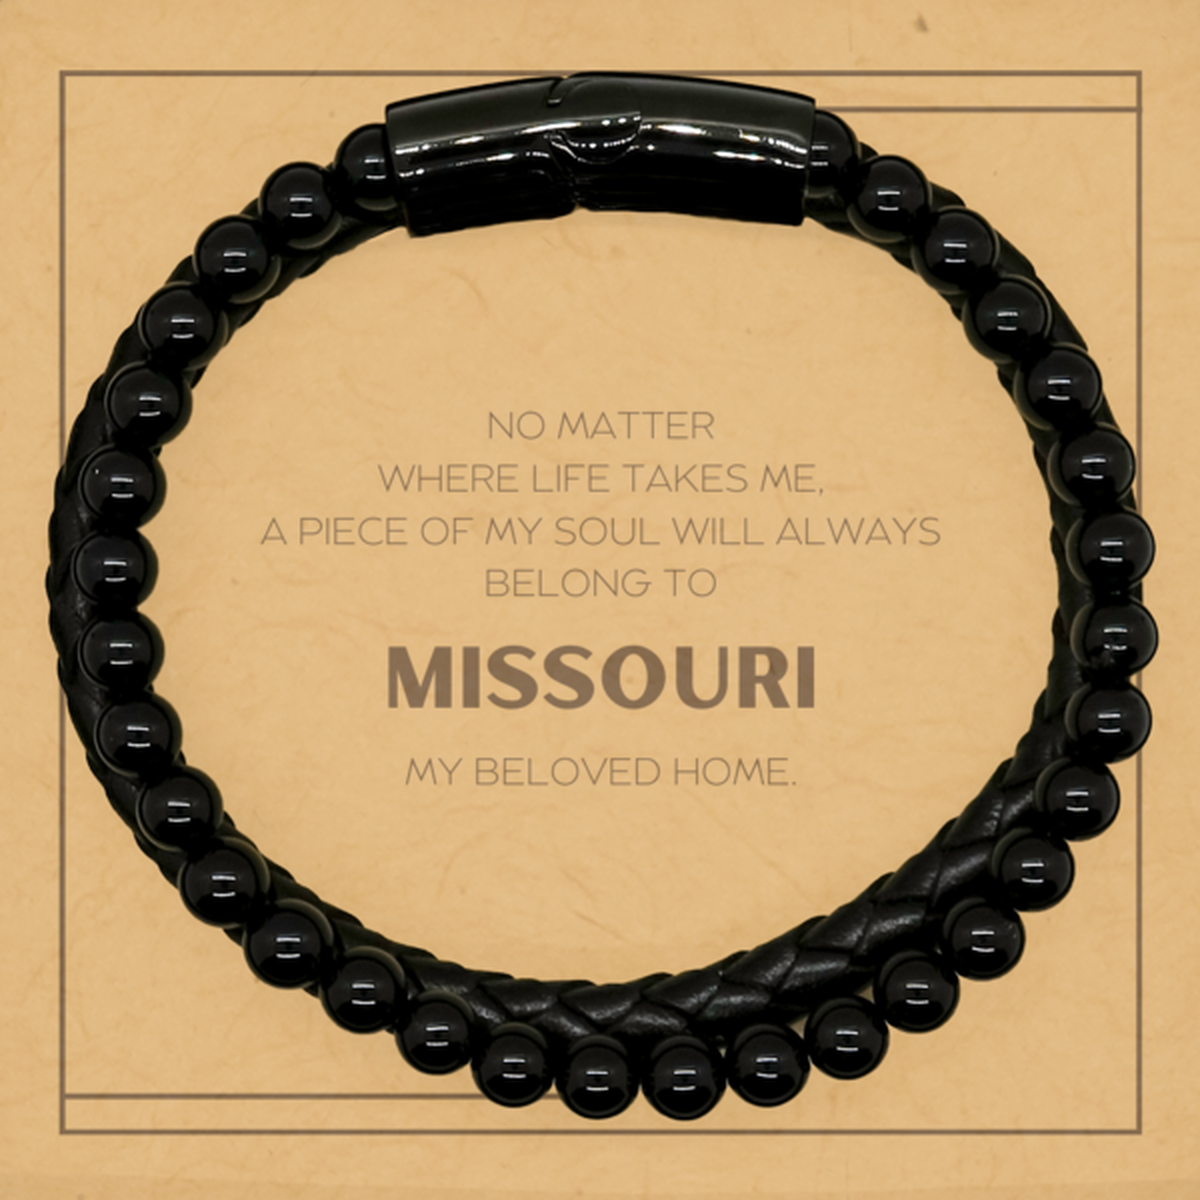 Love Missouri State Gifts, My soul will always belong to Missouri, Proud Stone Leather Bracelets, Birthday Unique Gifts For Missouri Men, Women, Friends